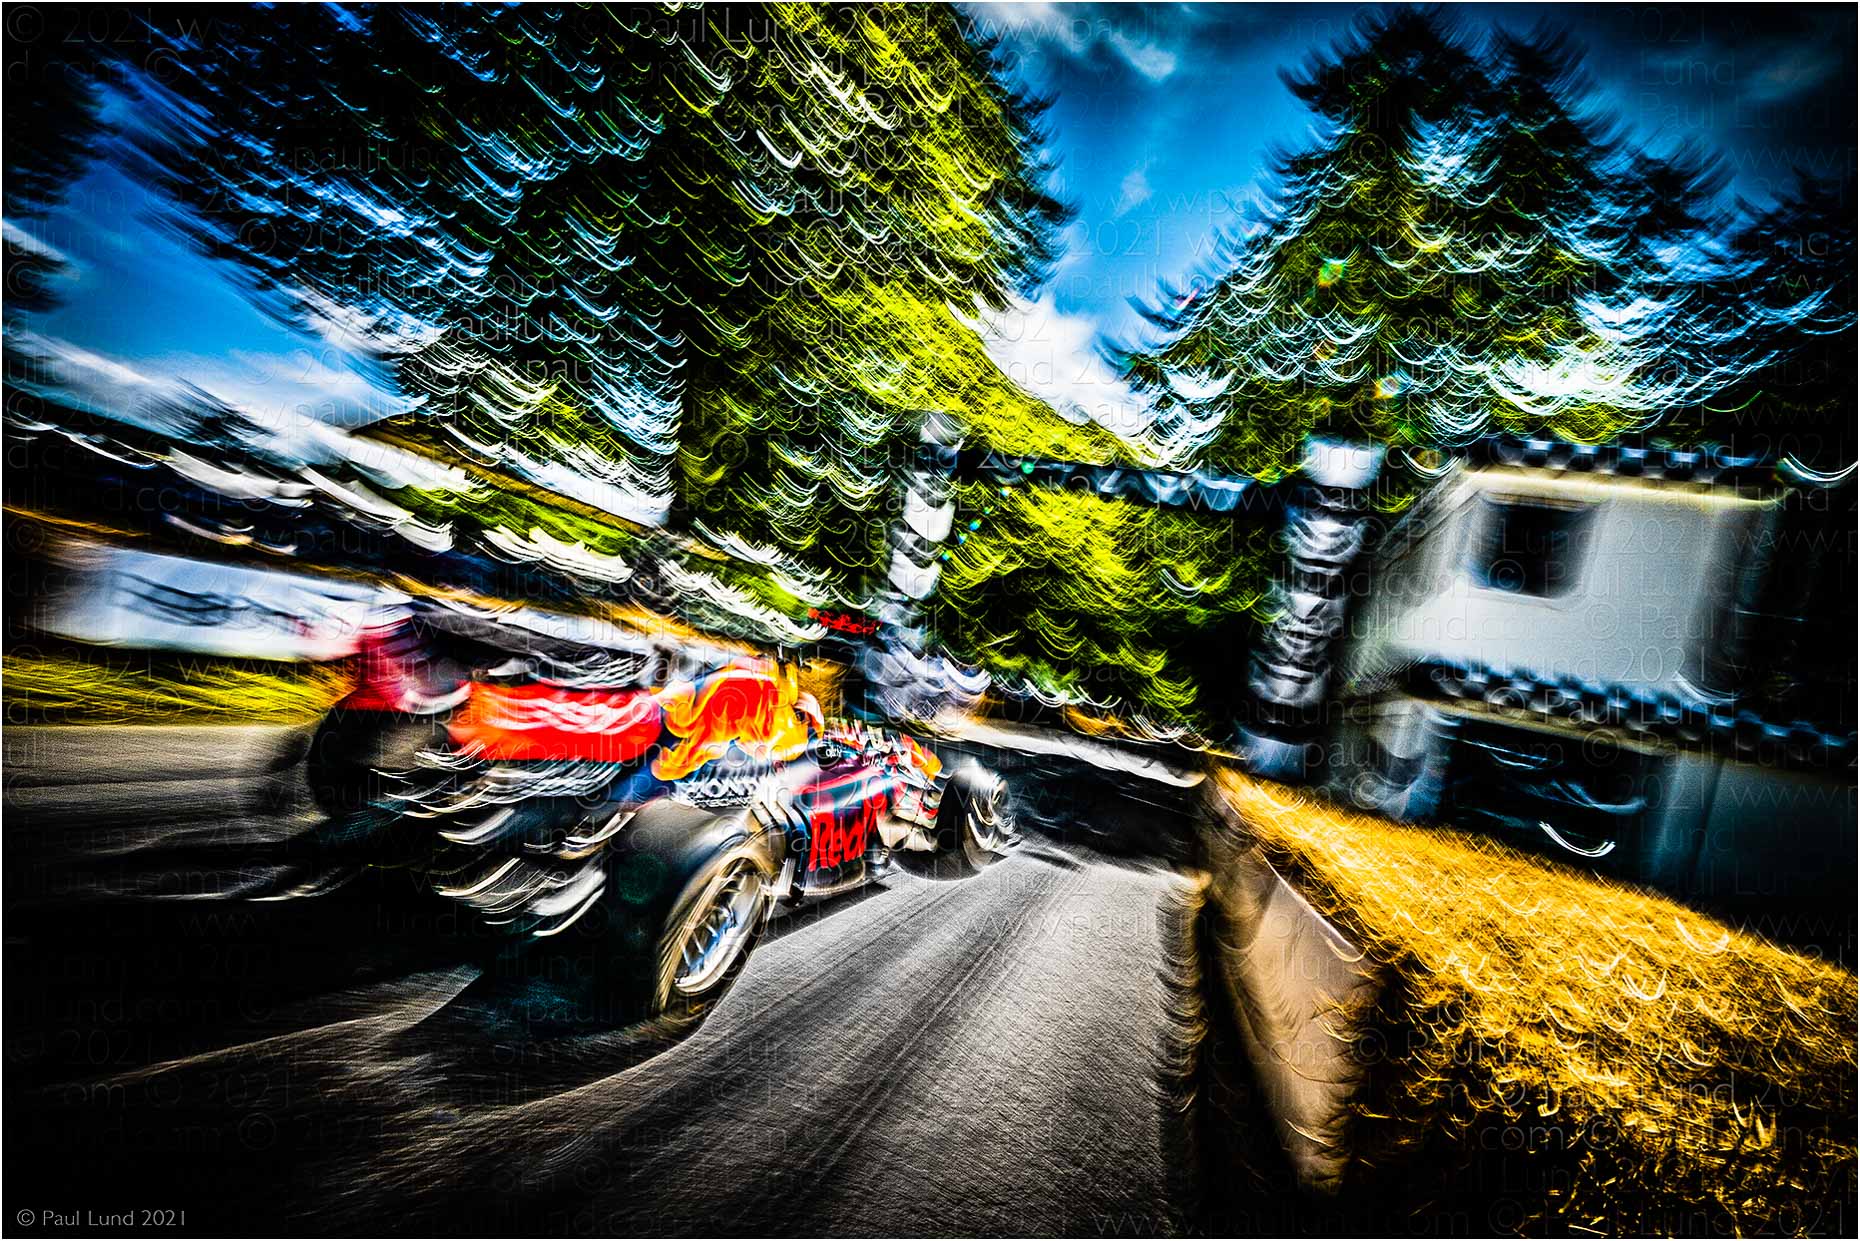 Red Bull Renault RB7 - Driver: Liam Lawson at Goodwood Festival of Speed 2021. Photographer: Paul Lund